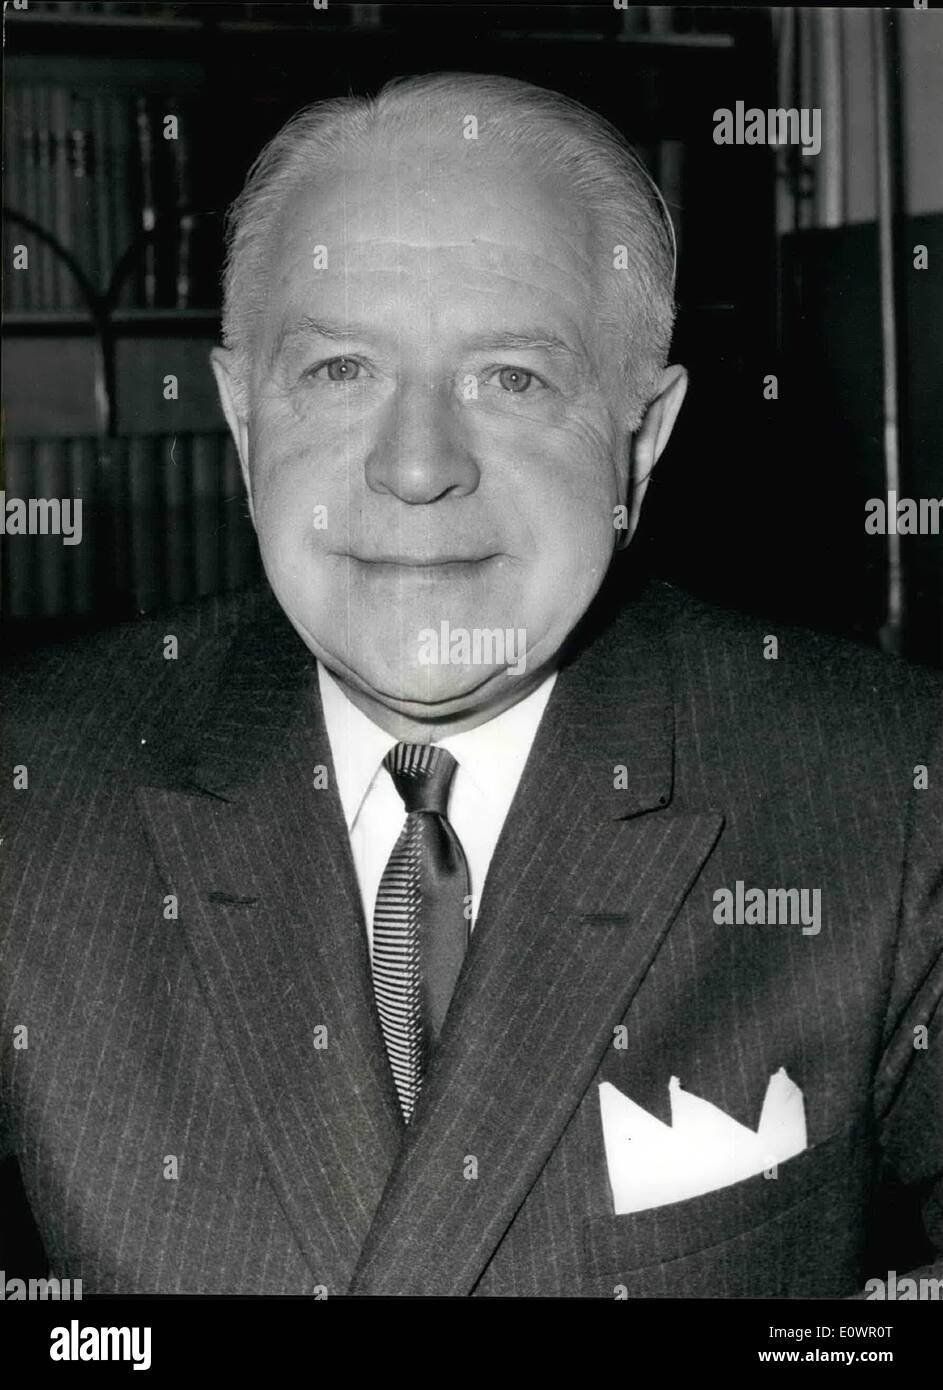 Feb. 02, 1964 - New High Commissioner for Canada.: The Honourable Lionel Chevrier, the new High Commissioner for Canada has come to London to take up his appointment , and is here seen in his office at Canada House. Stock Photo